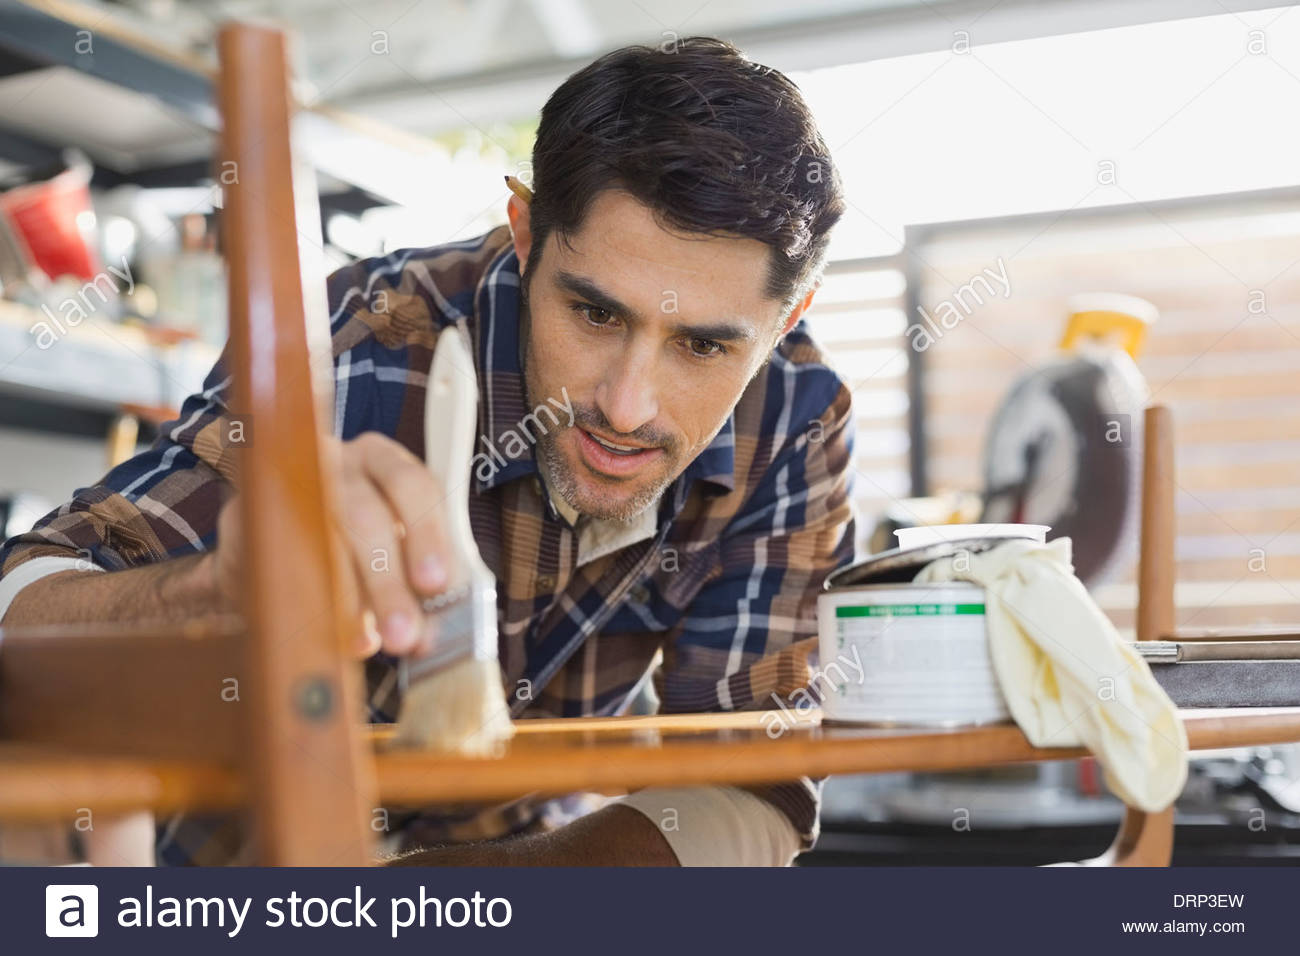 Carpenter staining wood in workshop Stock Photo